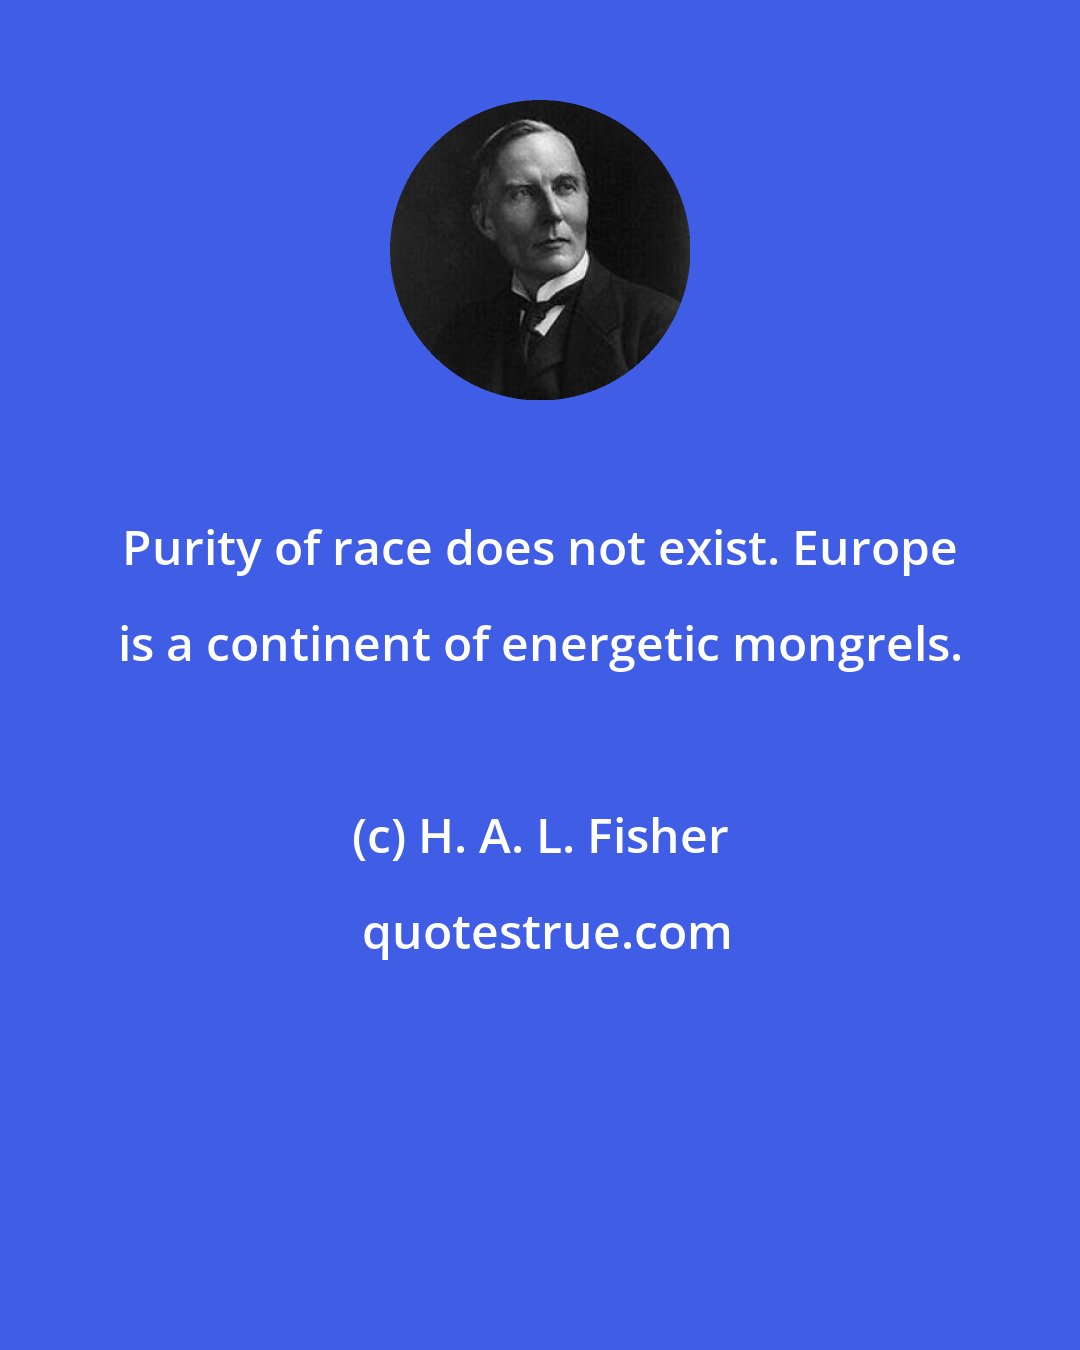 H. A. L. Fisher: Purity of race does not exist. Europe is a continent of energetic mongrels.